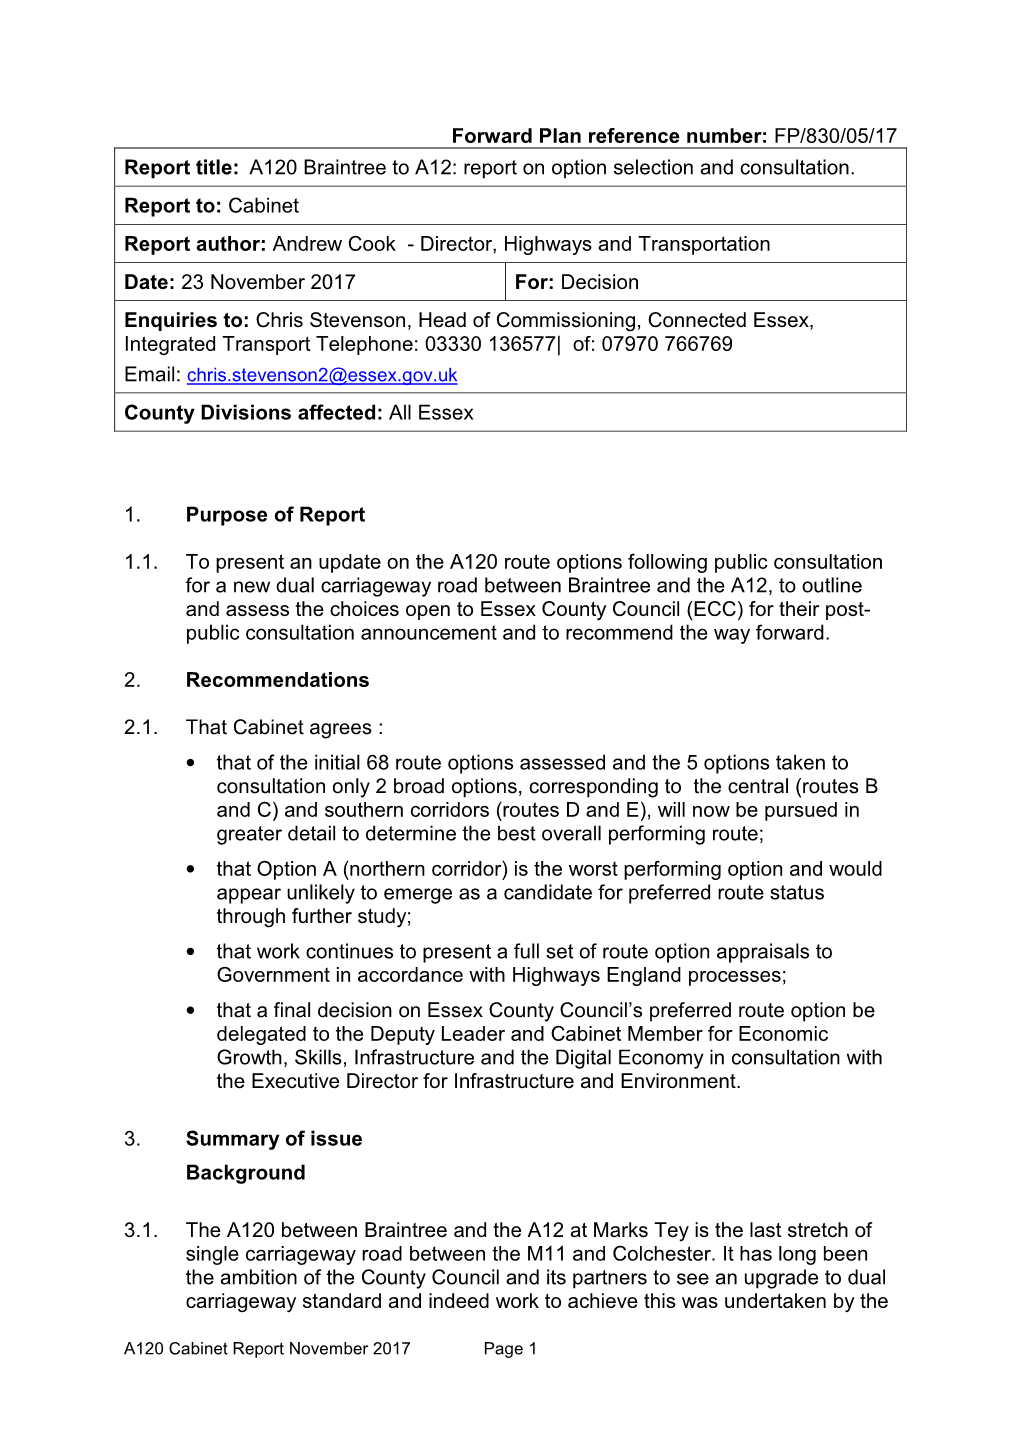 Forward Plan Reference Number: FP/830/05/17 Report Title: A120 Braintree to A12: Report on Option Selection and Consultation